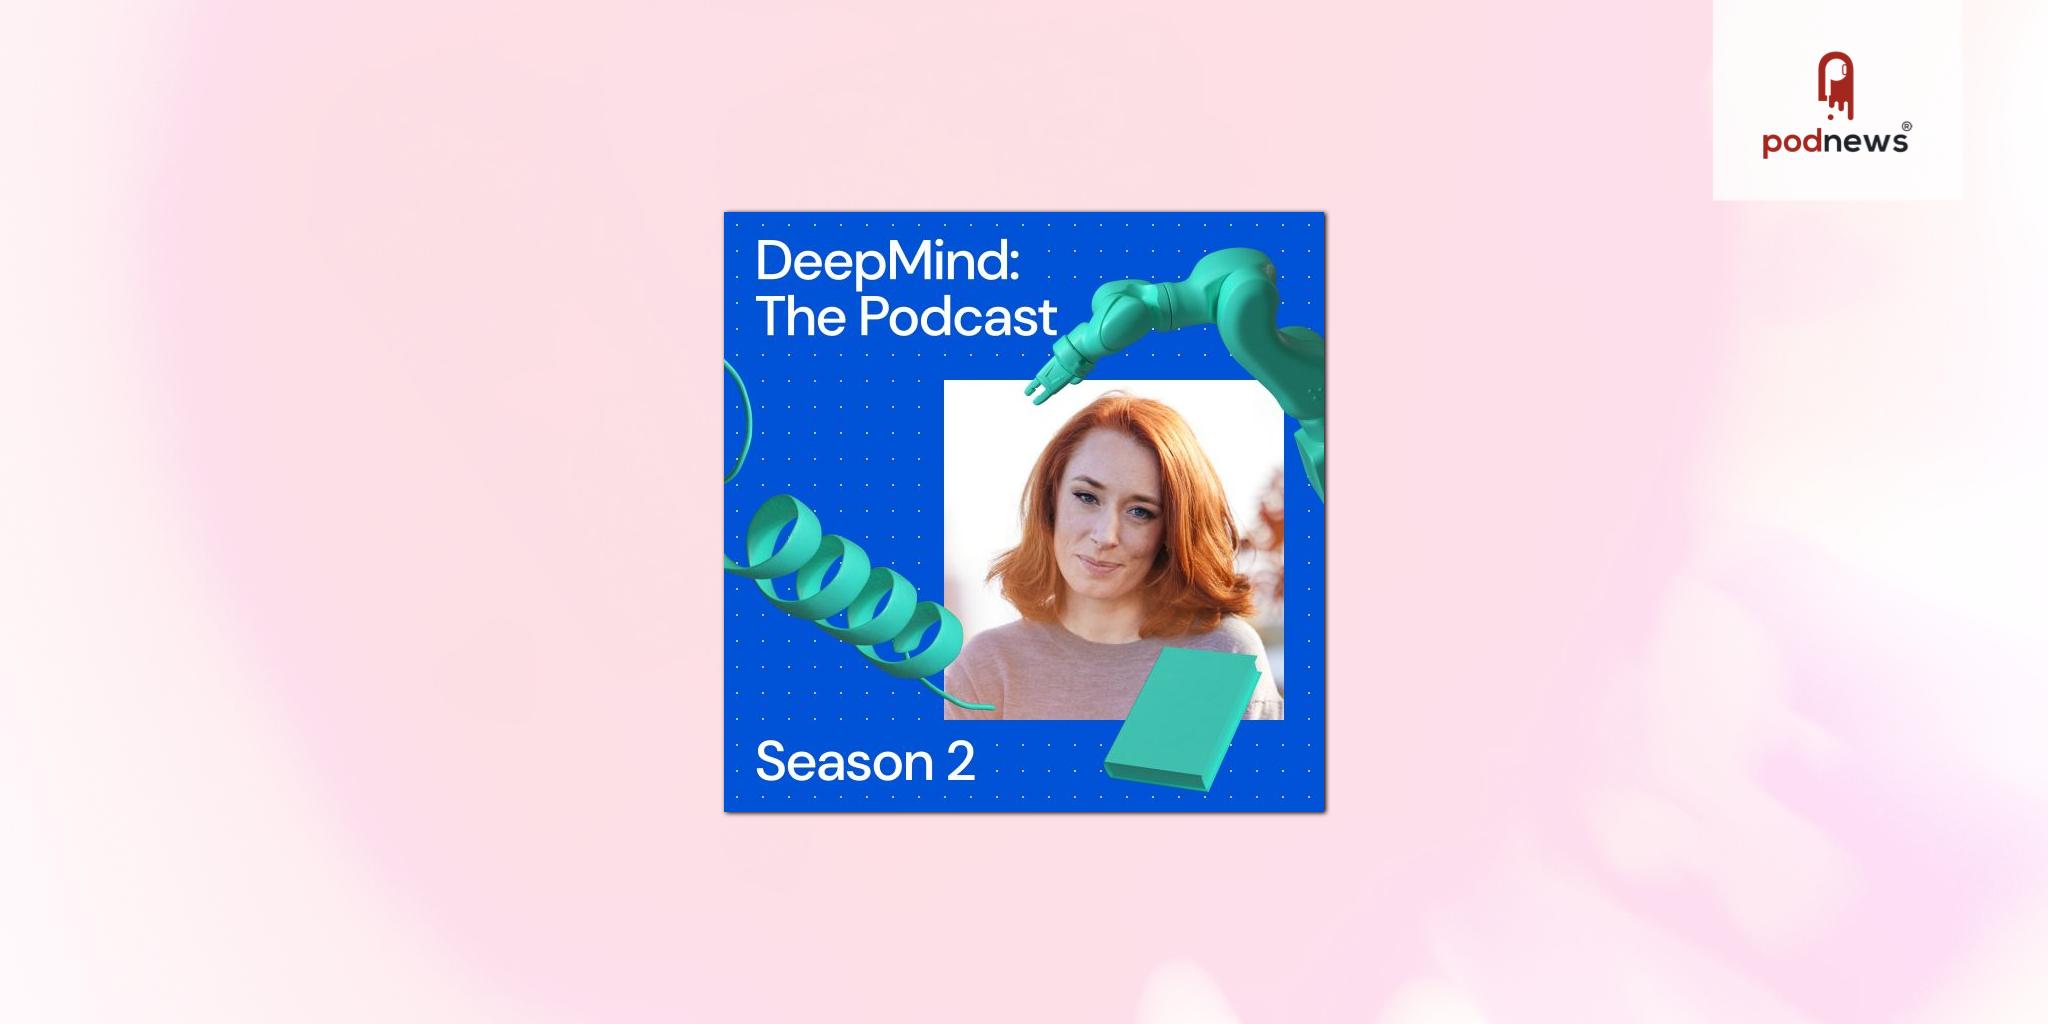 DeepMind launches season two of its chart-topping AI podcast